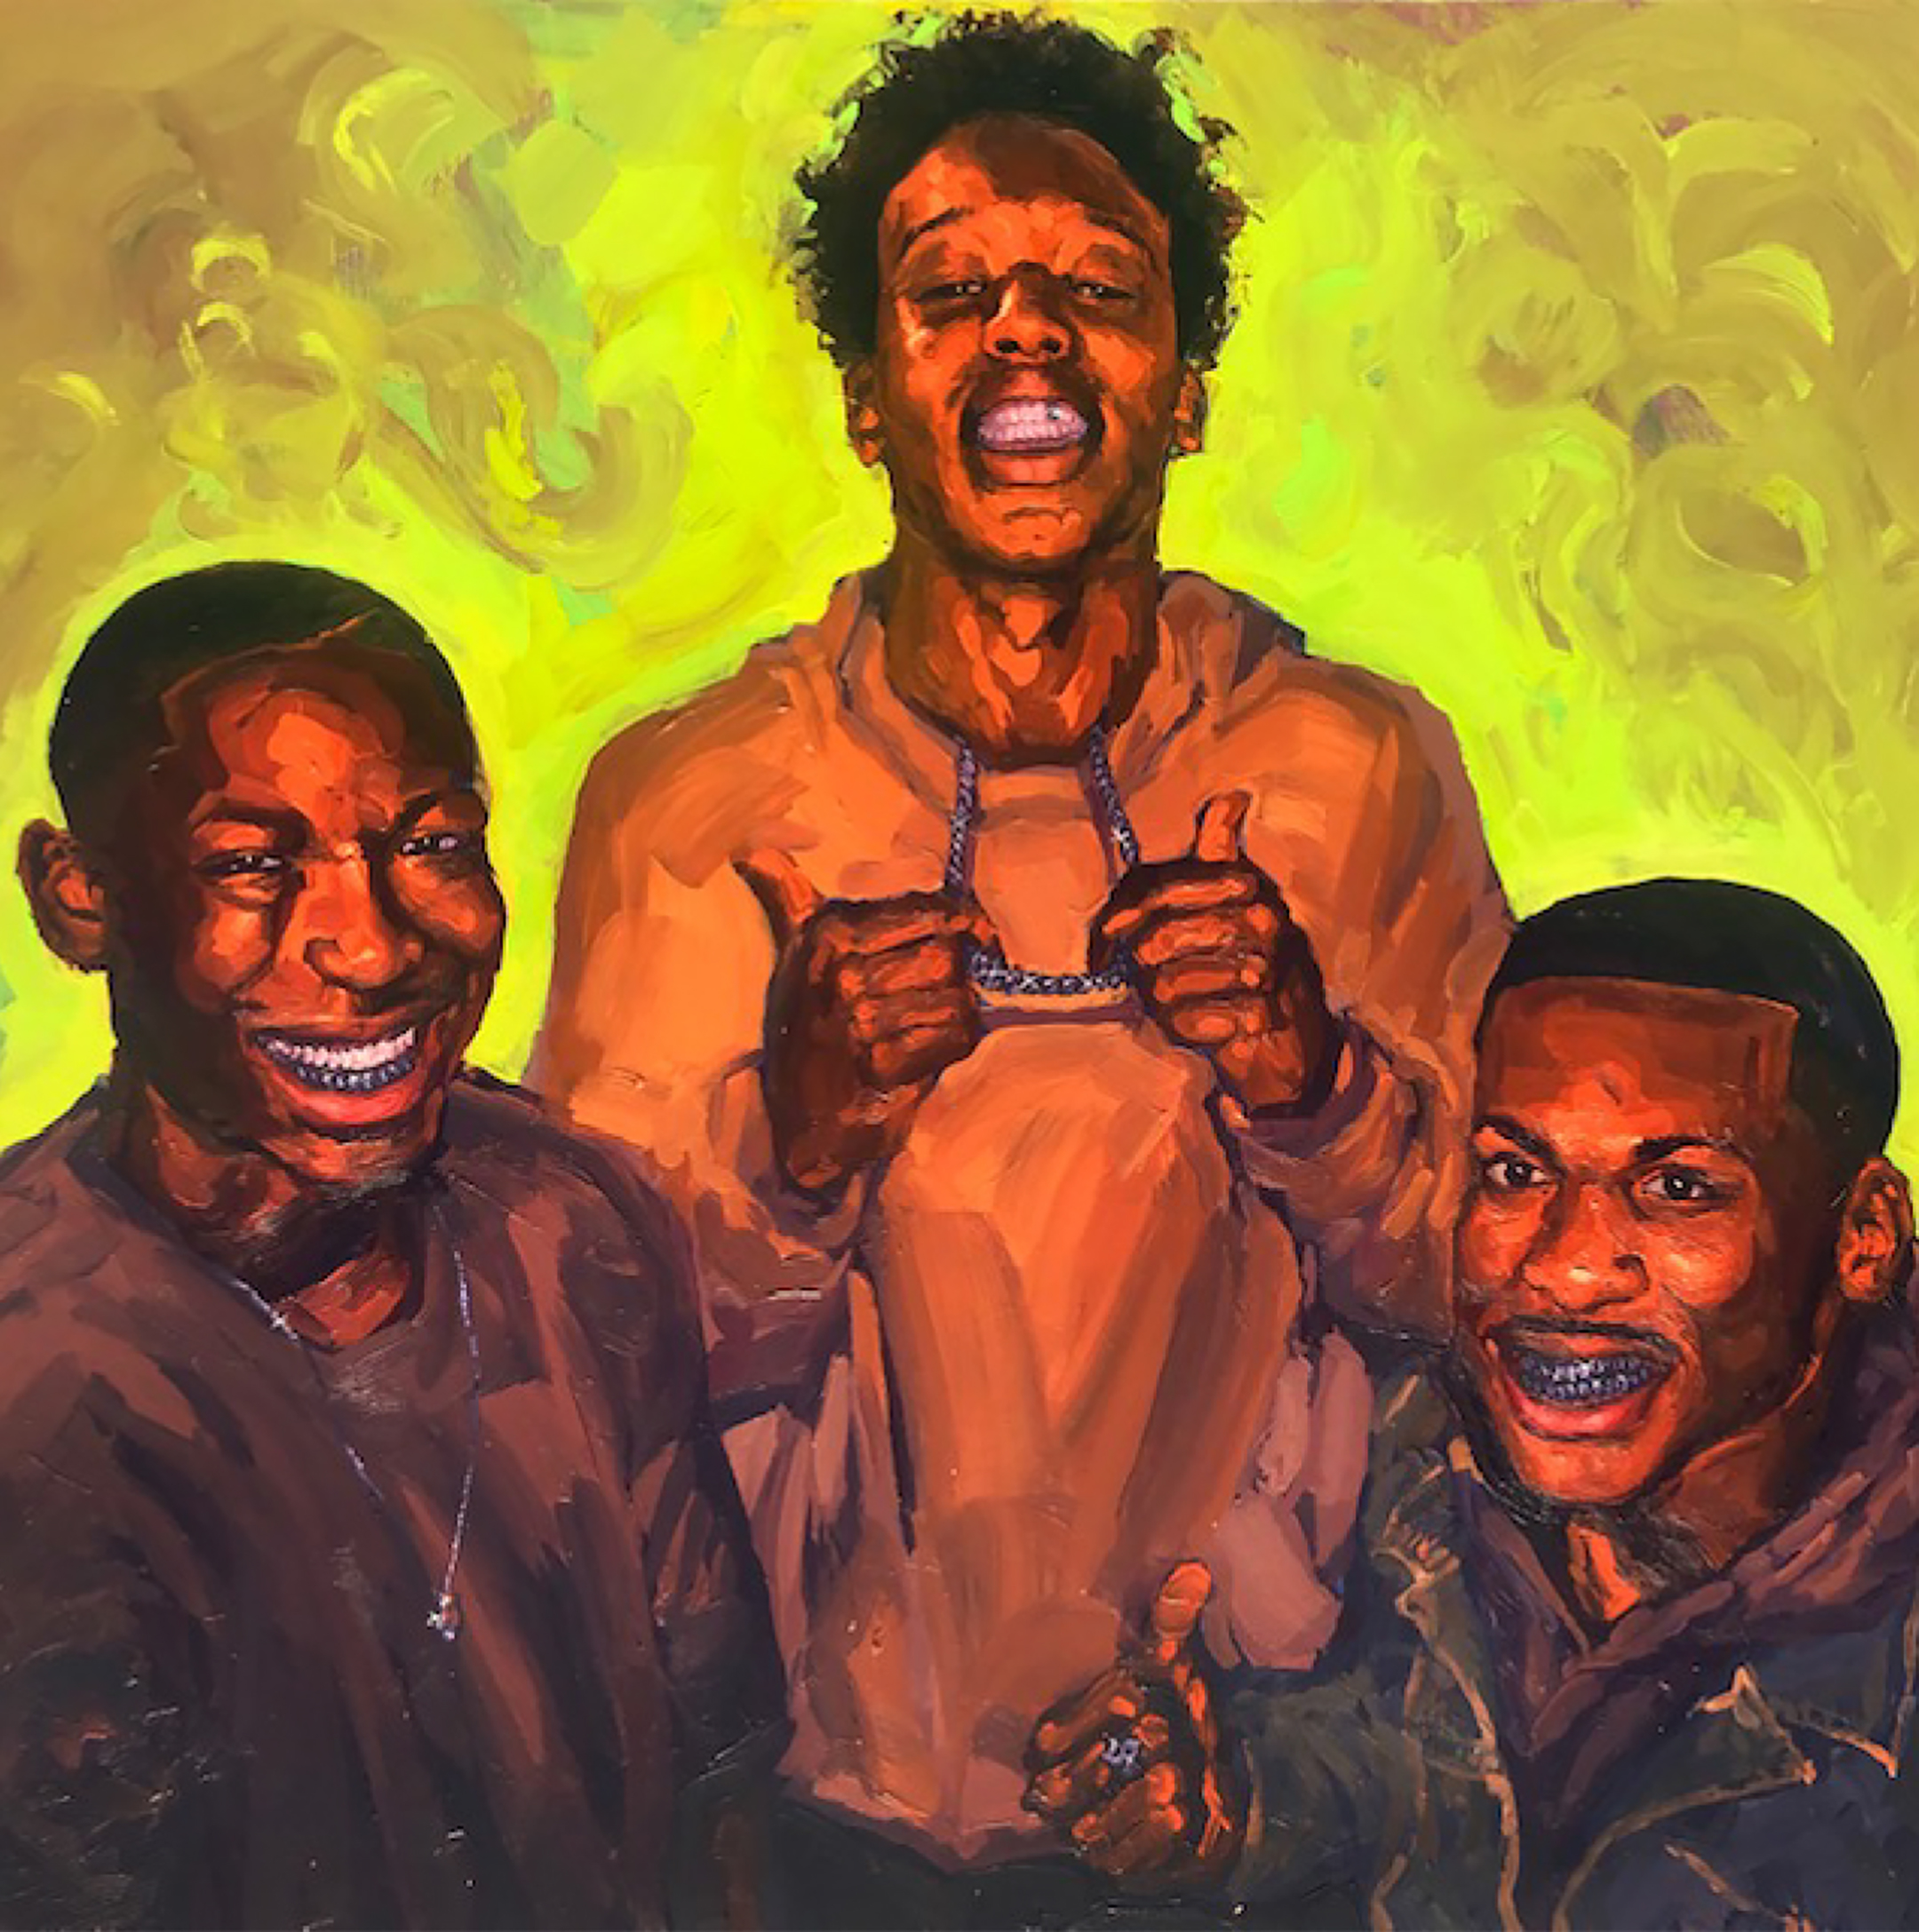 Painting of three young black men, the one in the middle slightly taller than the others, against a lime green background